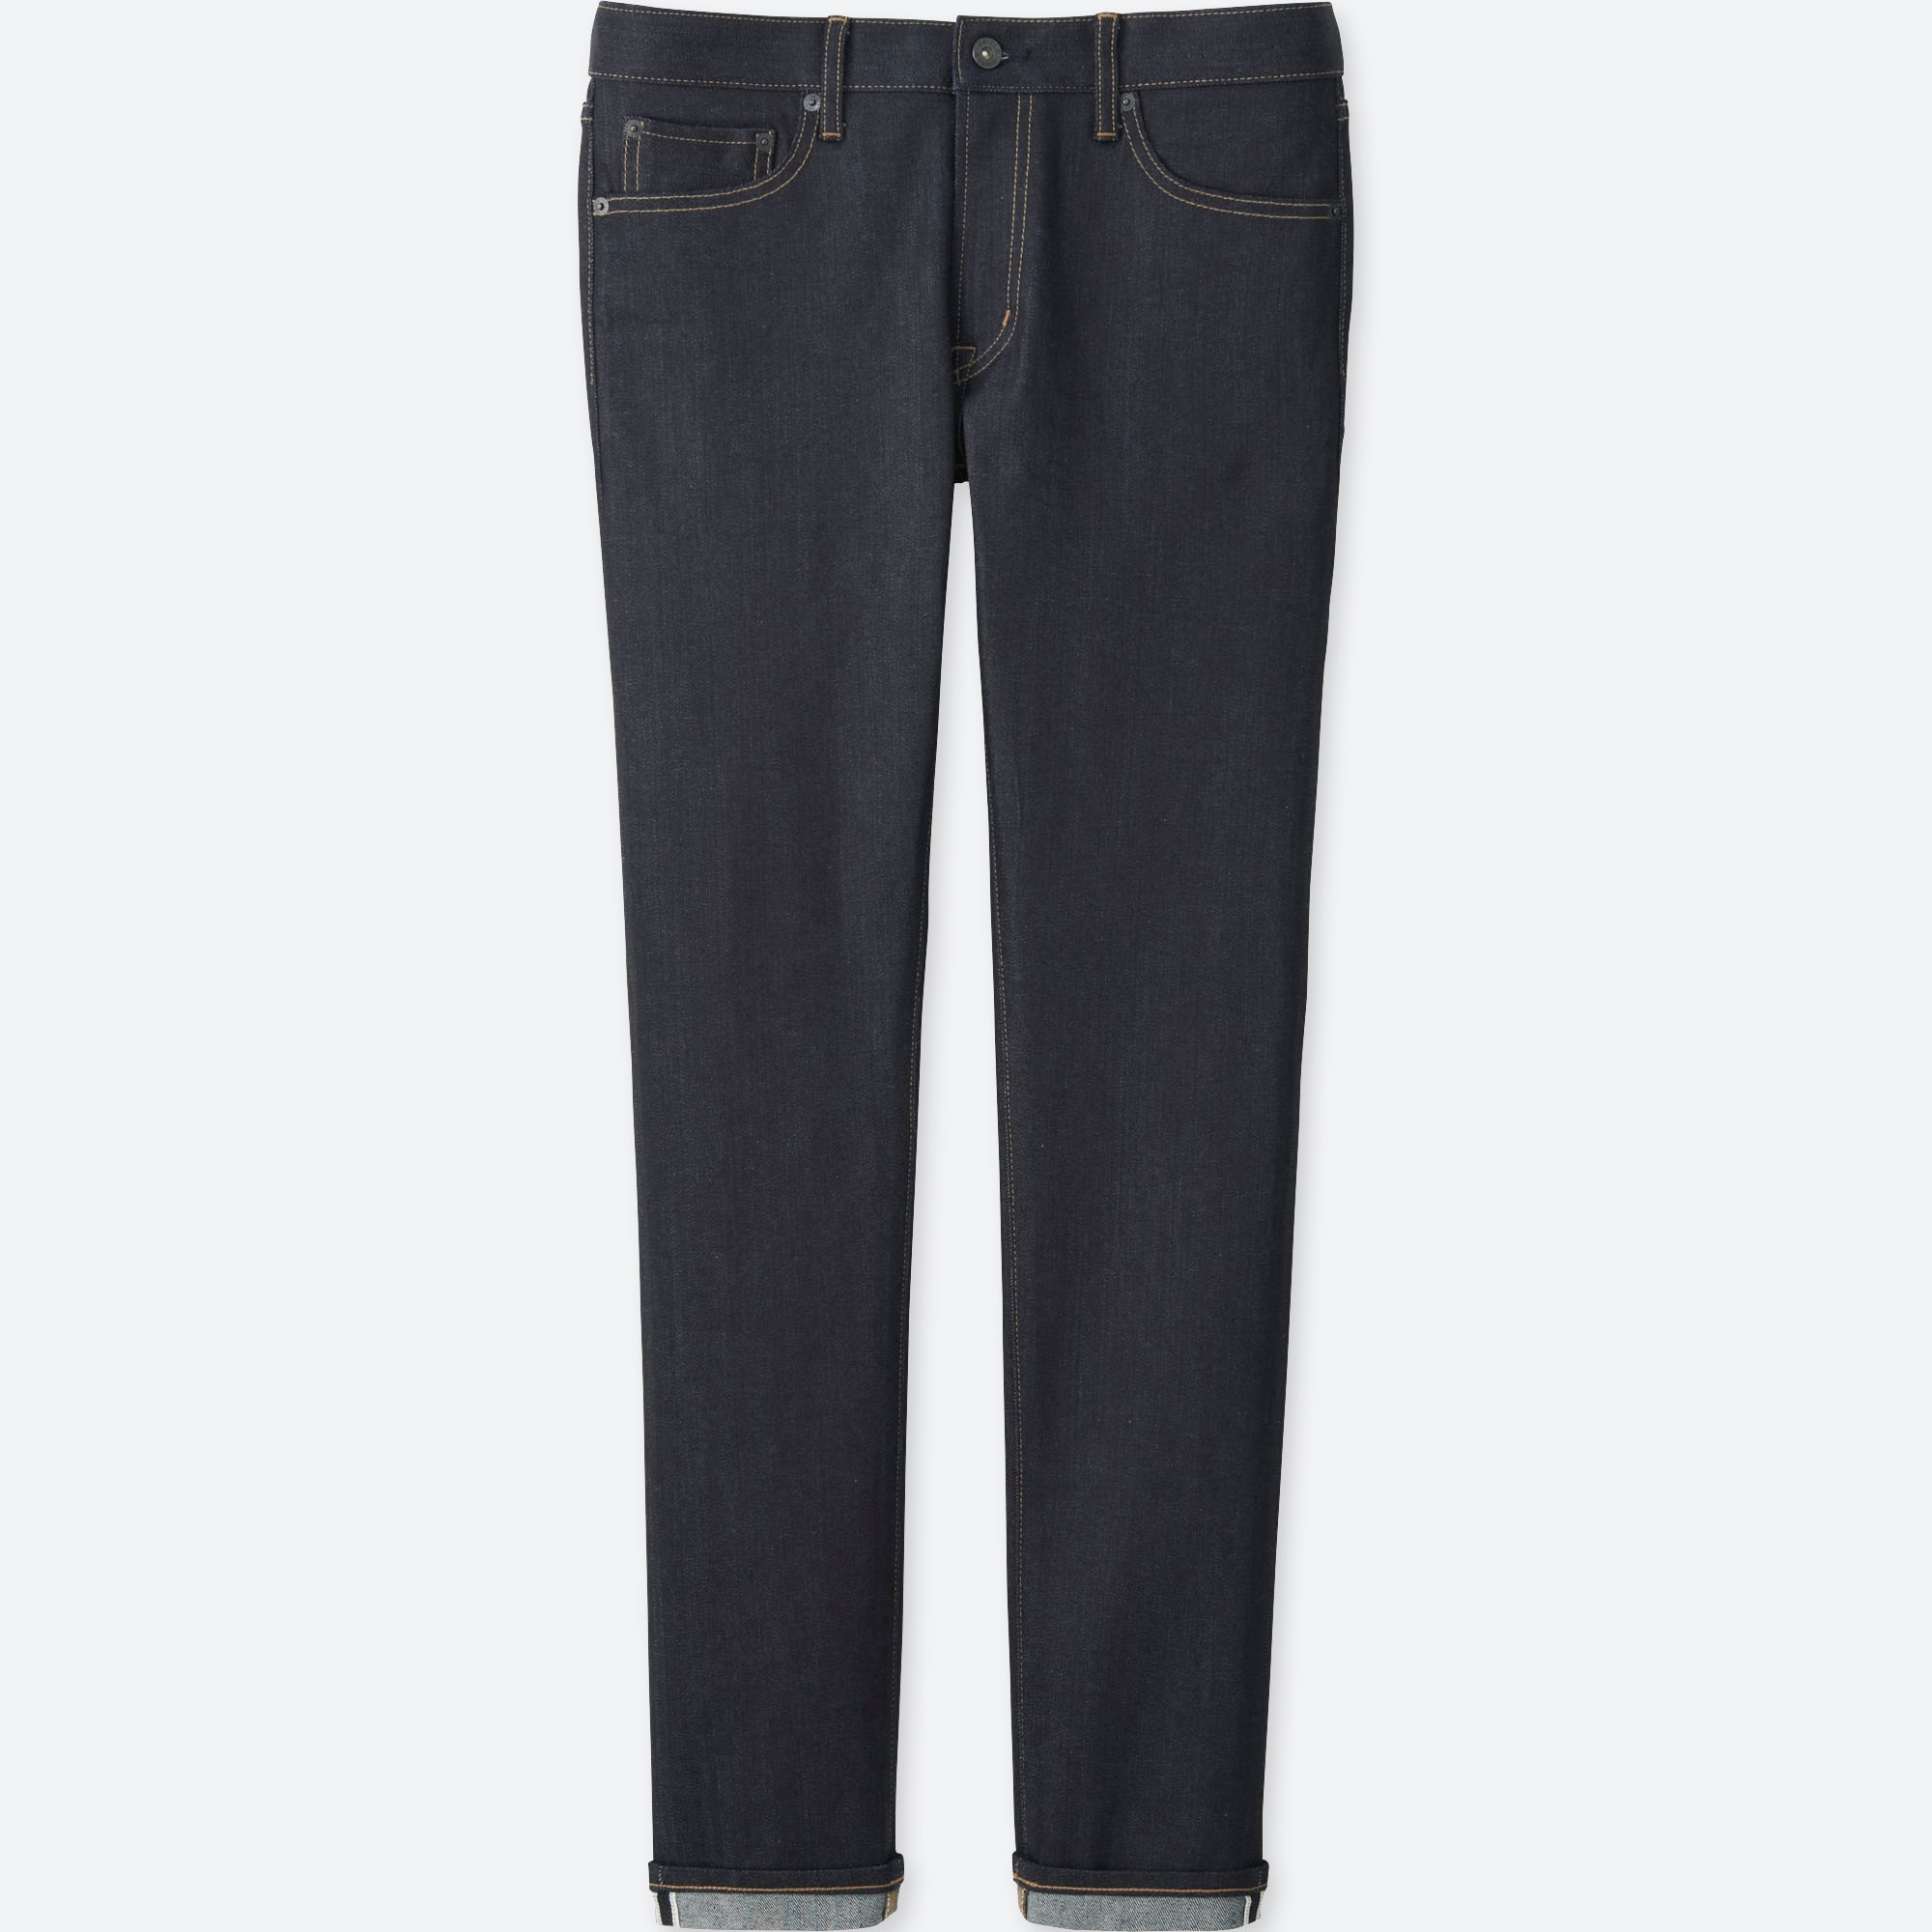 uniqlo selvedge skinny fit tapered jeans